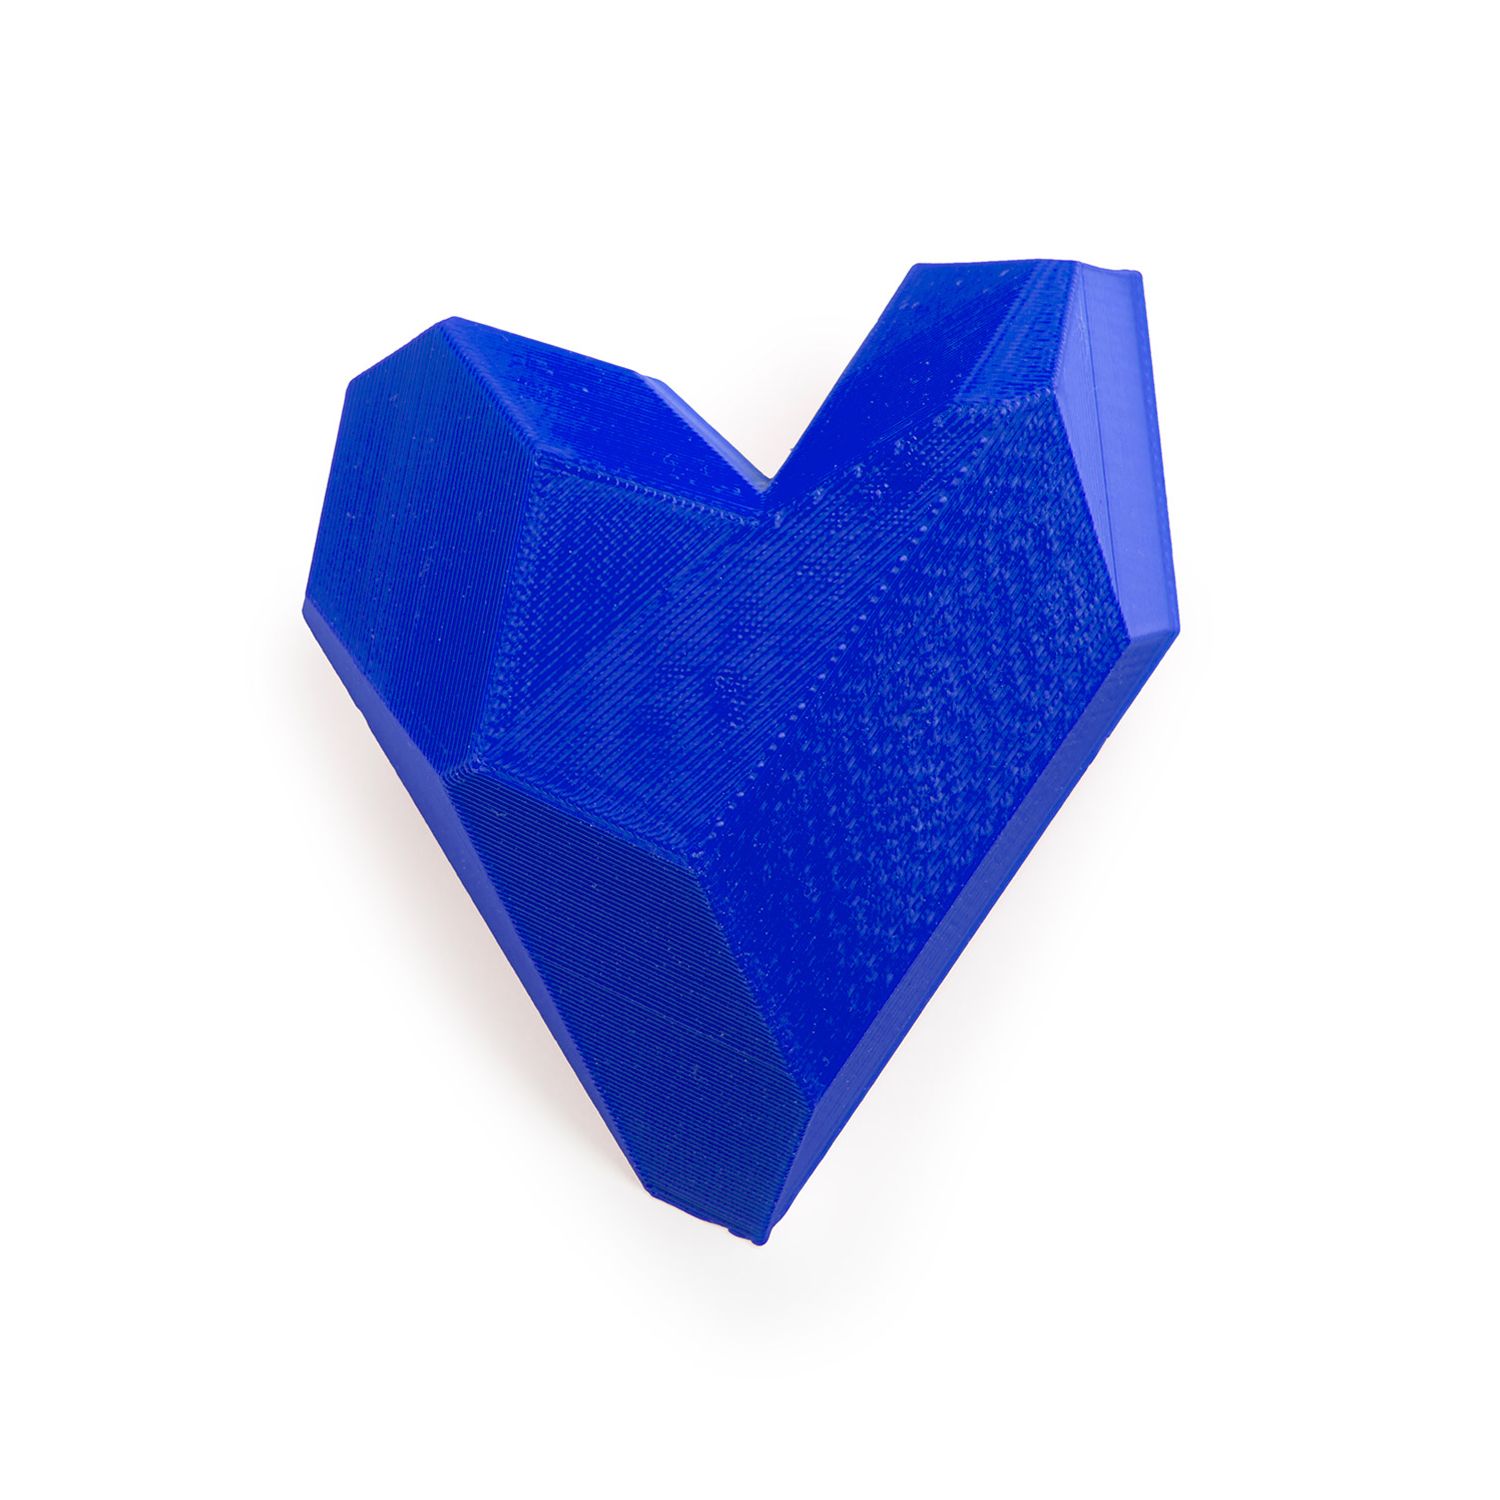 Maison 203: Mini Heart Brooch – Blue Product Image 1 of 3